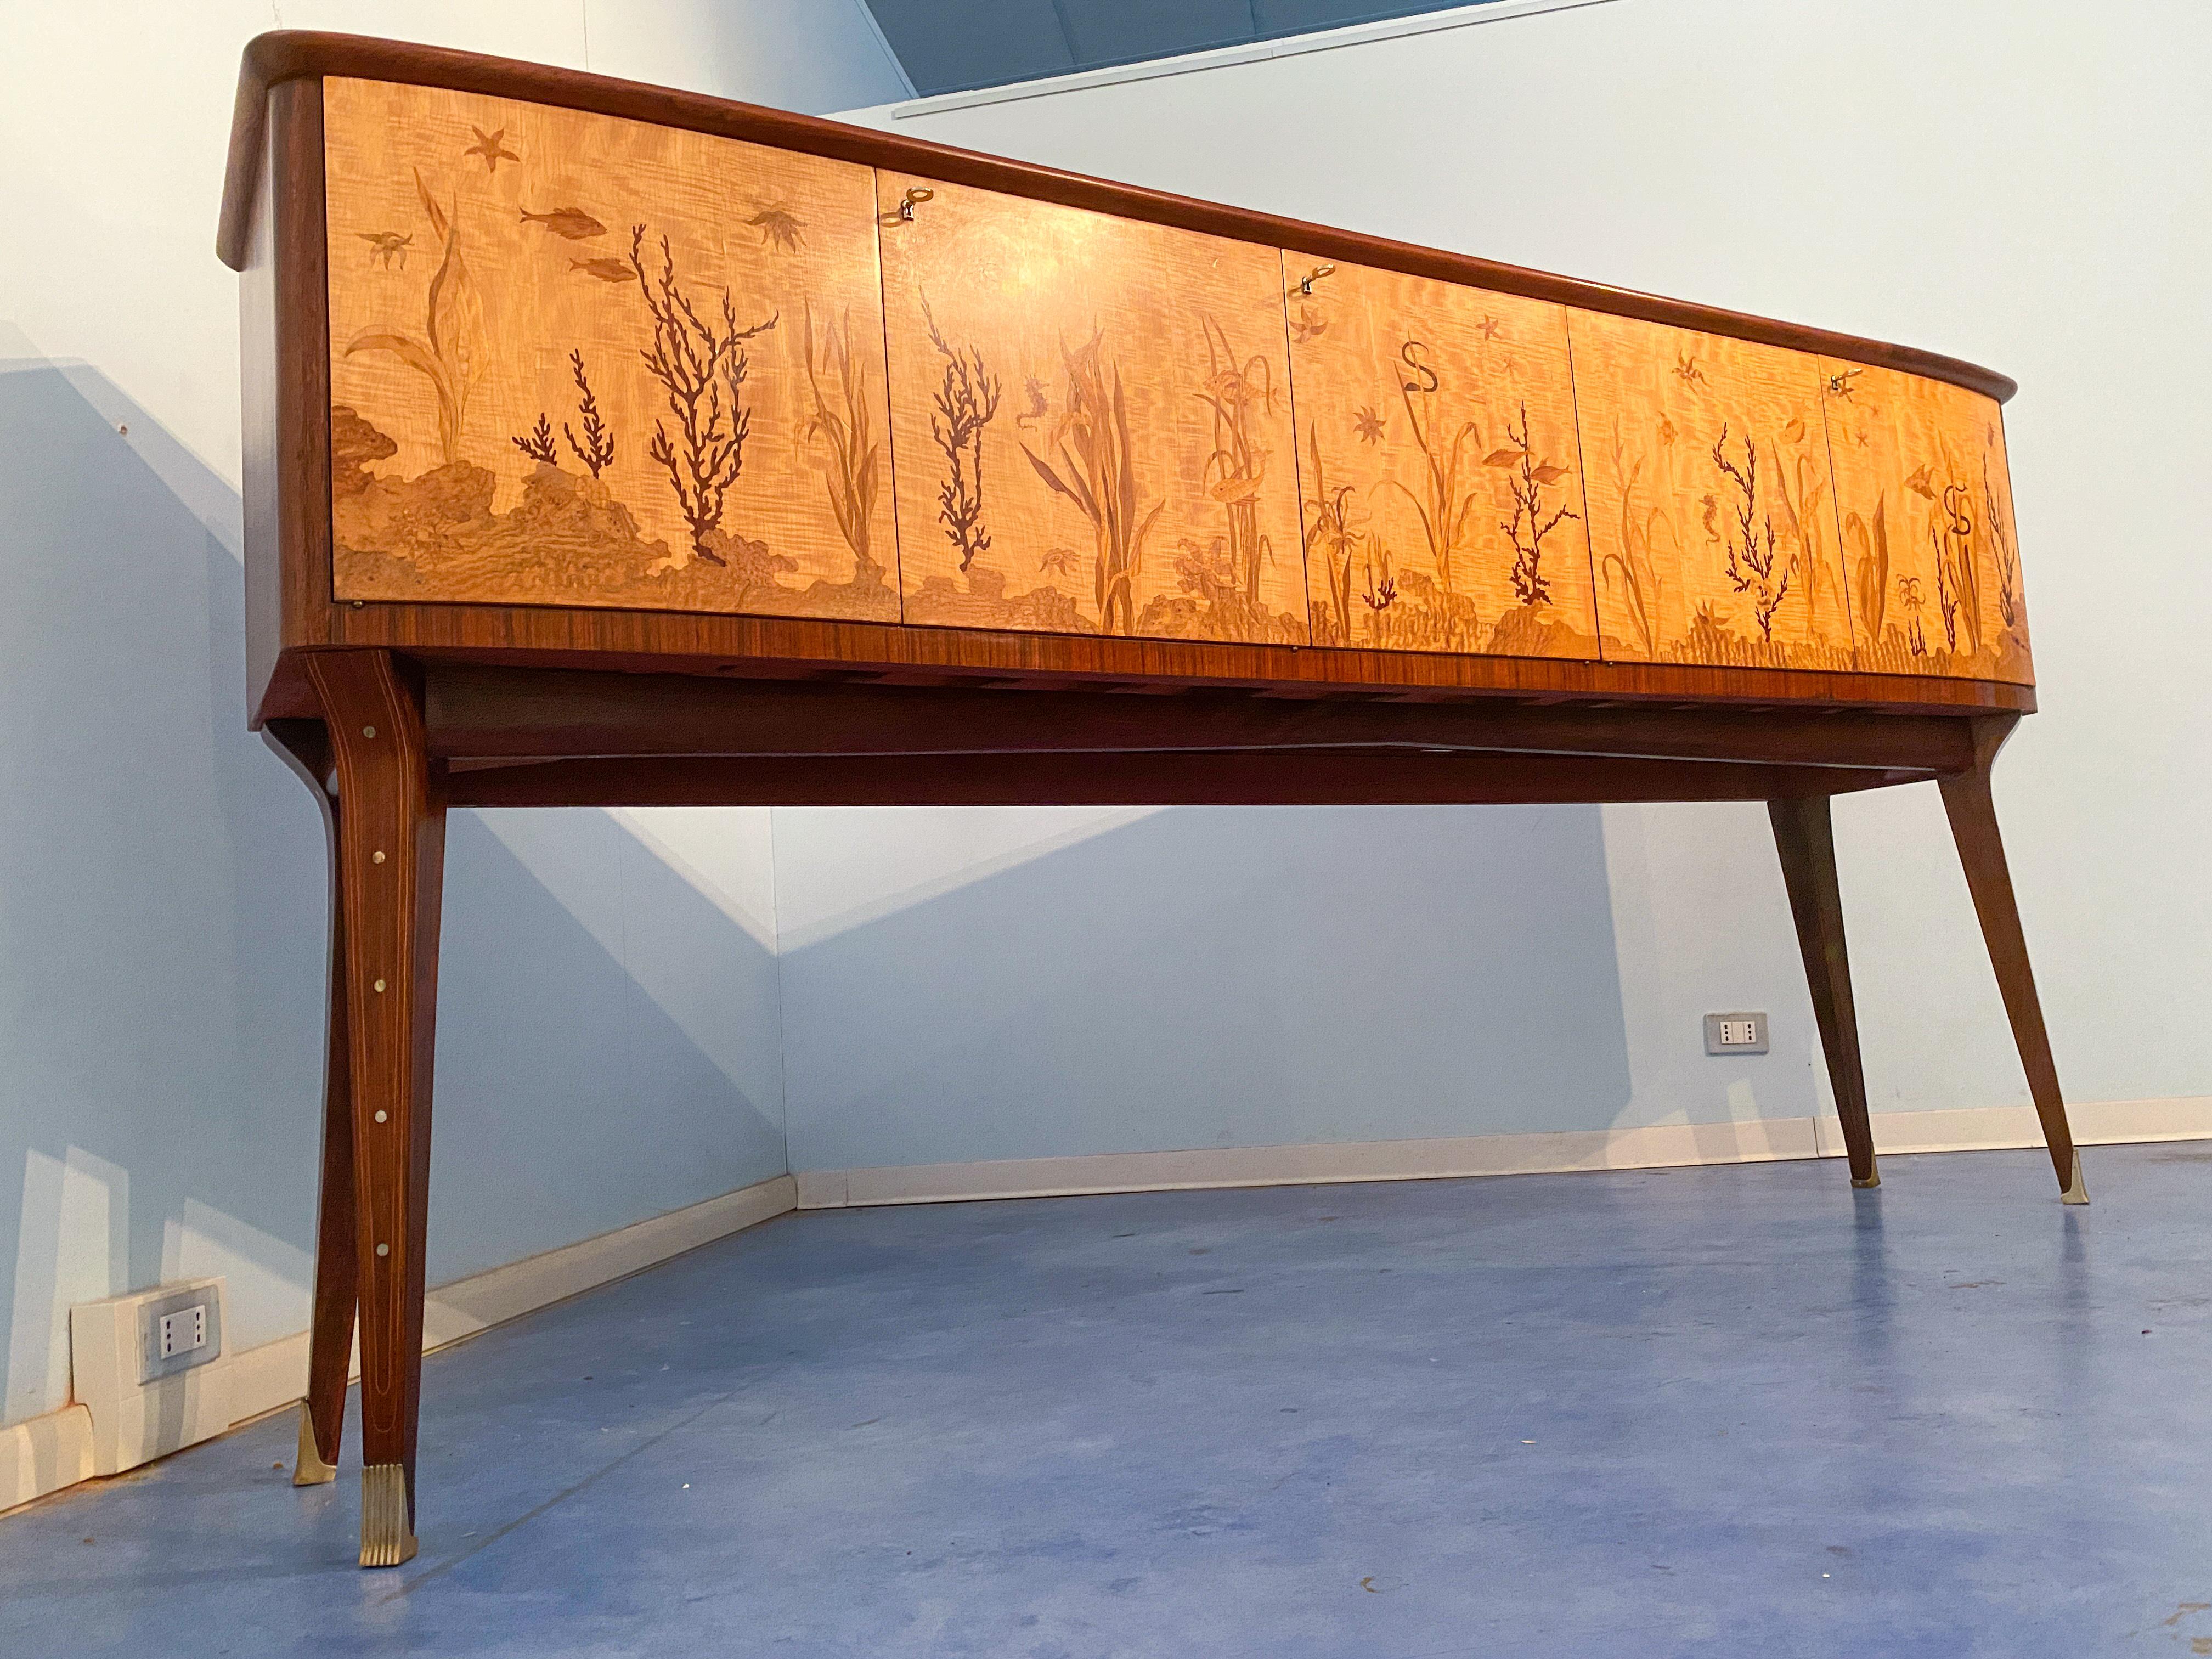 Italian Midcentury Inlaid Maple Sideboard by Andrea Gusmai, 1950s For Sale 3